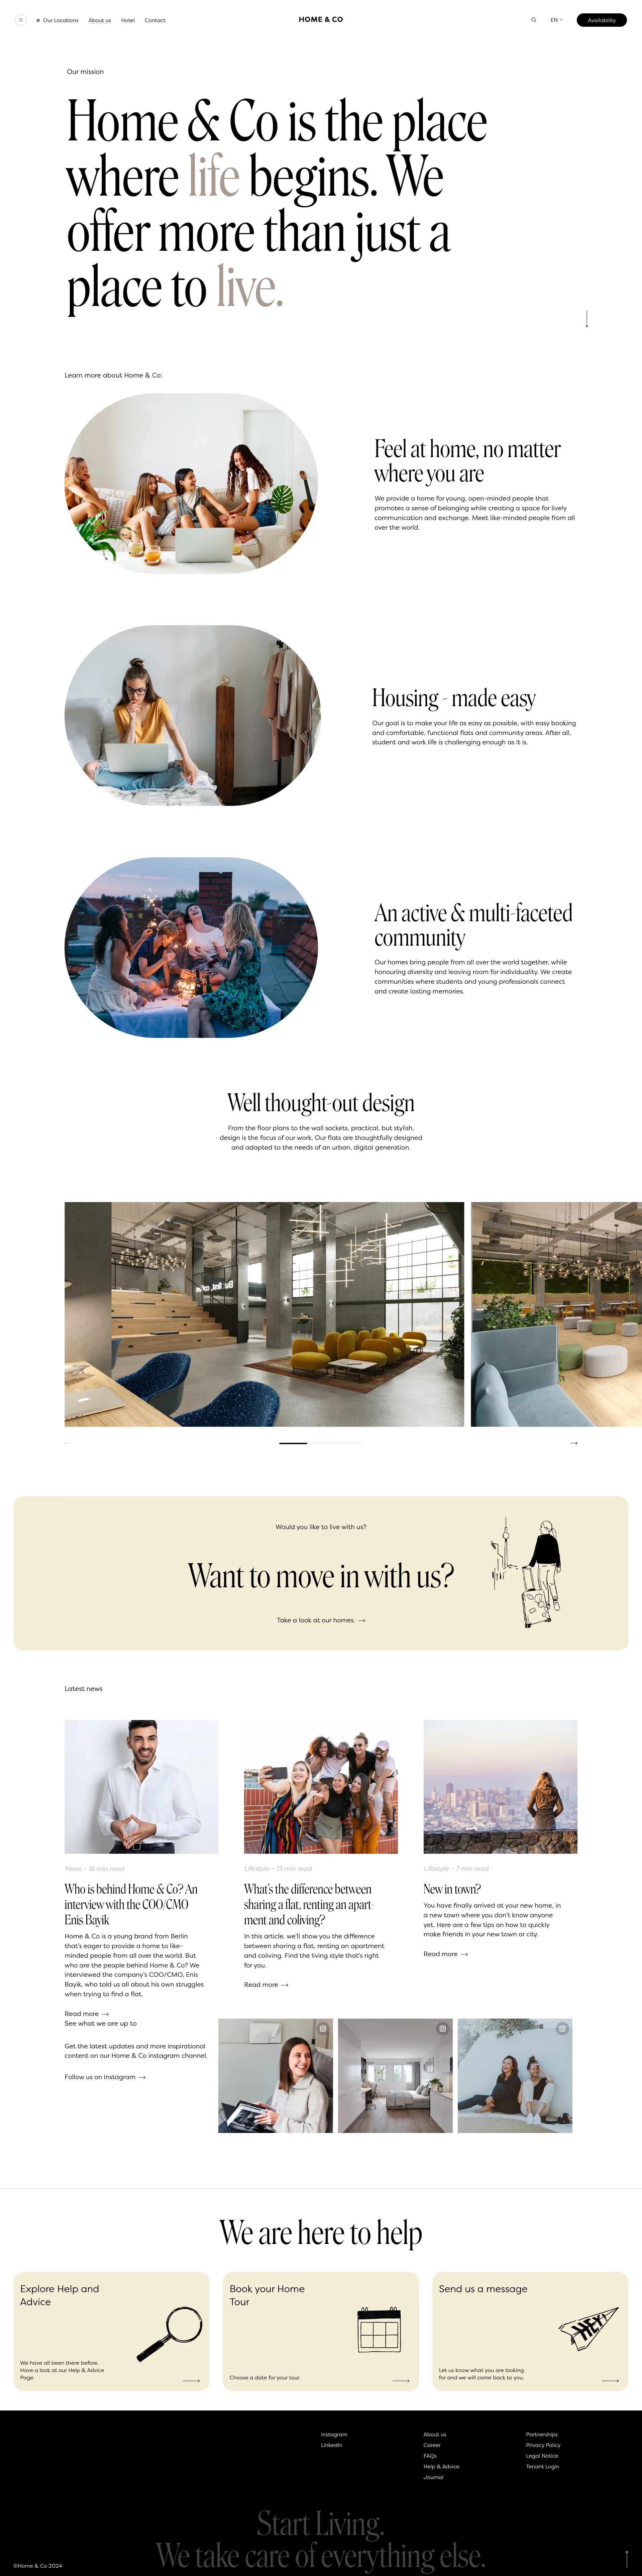 Home & Co Landing Page Example: Our cosy, furnished and smartly designed flats will make you feel right at home within an international, diverse coliving community of like-minded people. And if you want privacy, you will find it in your own flat or room. Explore Home & Co.